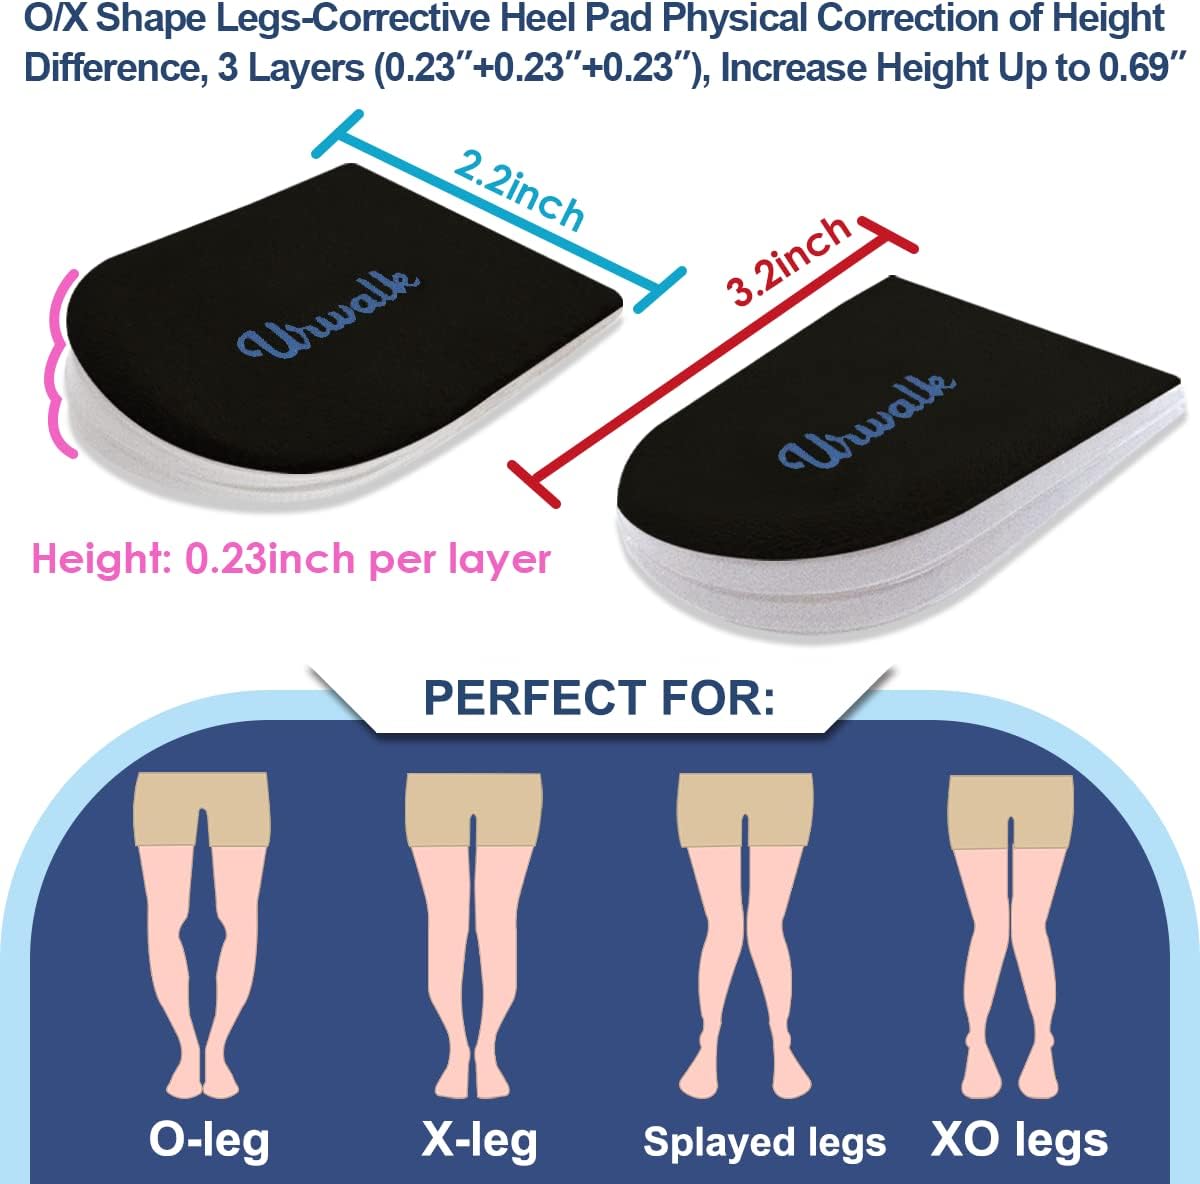 Urwalk 3 Layers Adjustable Supination Over - Pronation Adhesive Corrective Gel Shoe Inserts, Medial Lateral Heel Wedge Lifts for